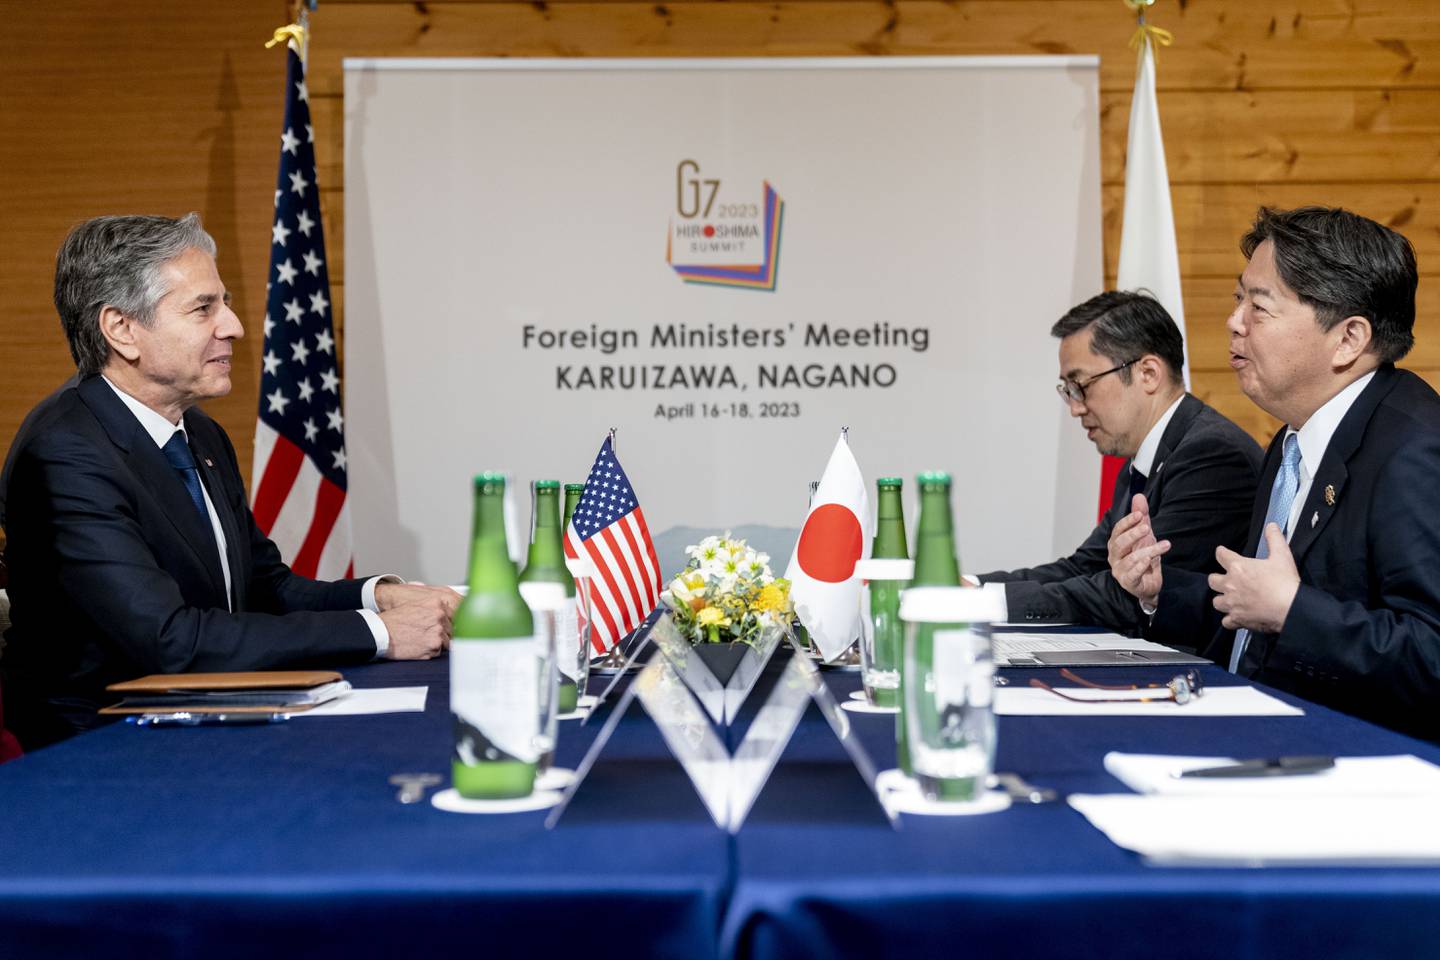 U.S. Secretary of State Antony Blinken, left, and Japan's Foreign Minister Yoshimasa Hayashi meet during a G7 Foreign Ministers' Meeting at The Prince Karuizawa hotel in Karuizawa, Japan, Monday, April 17, 2023.